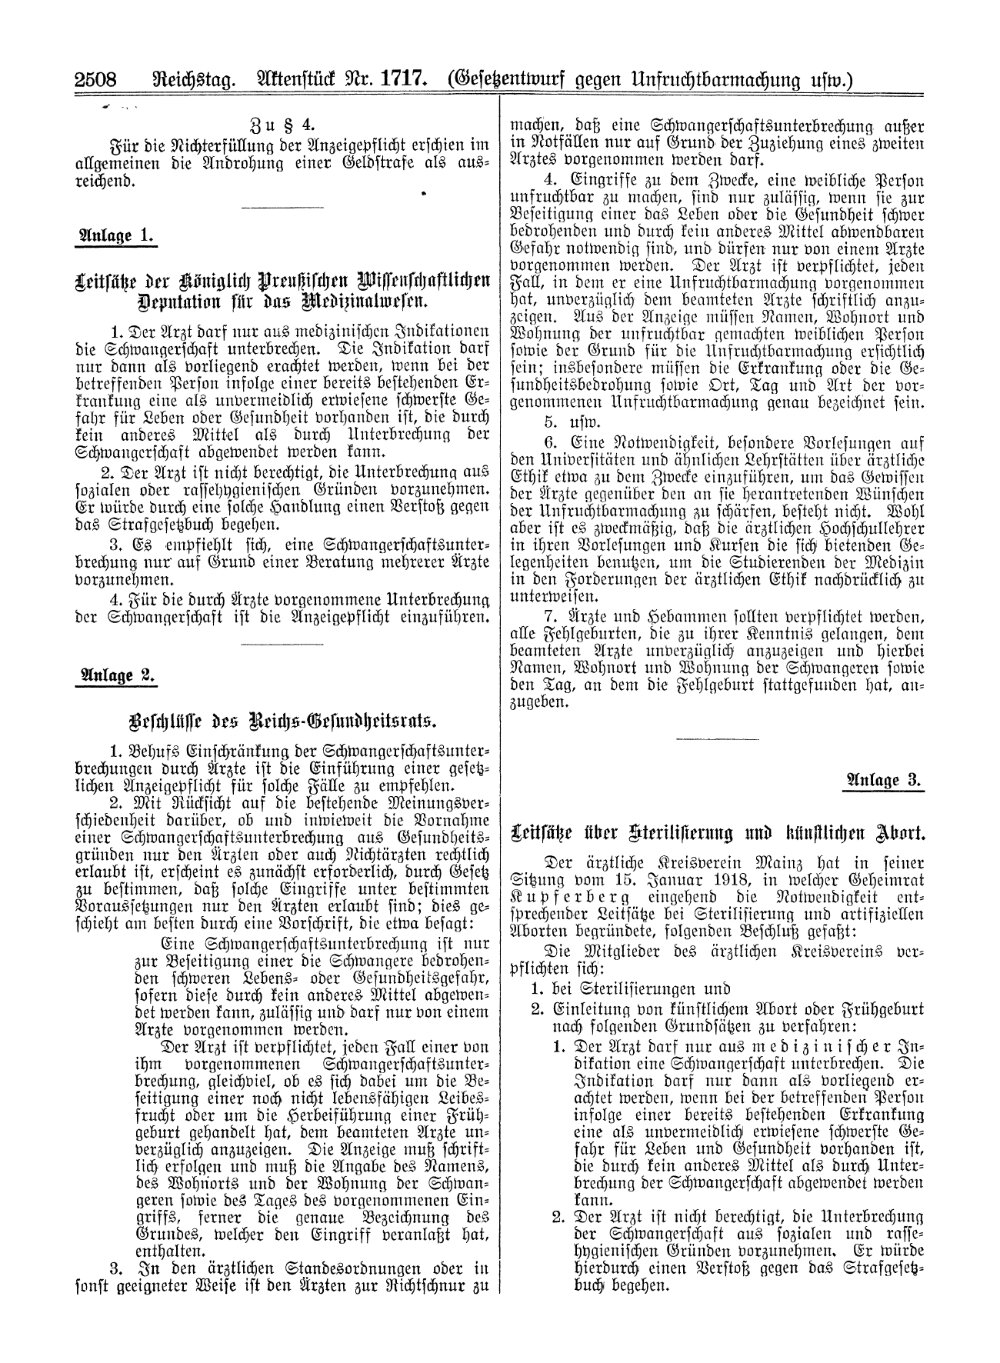 Scan of page 2508